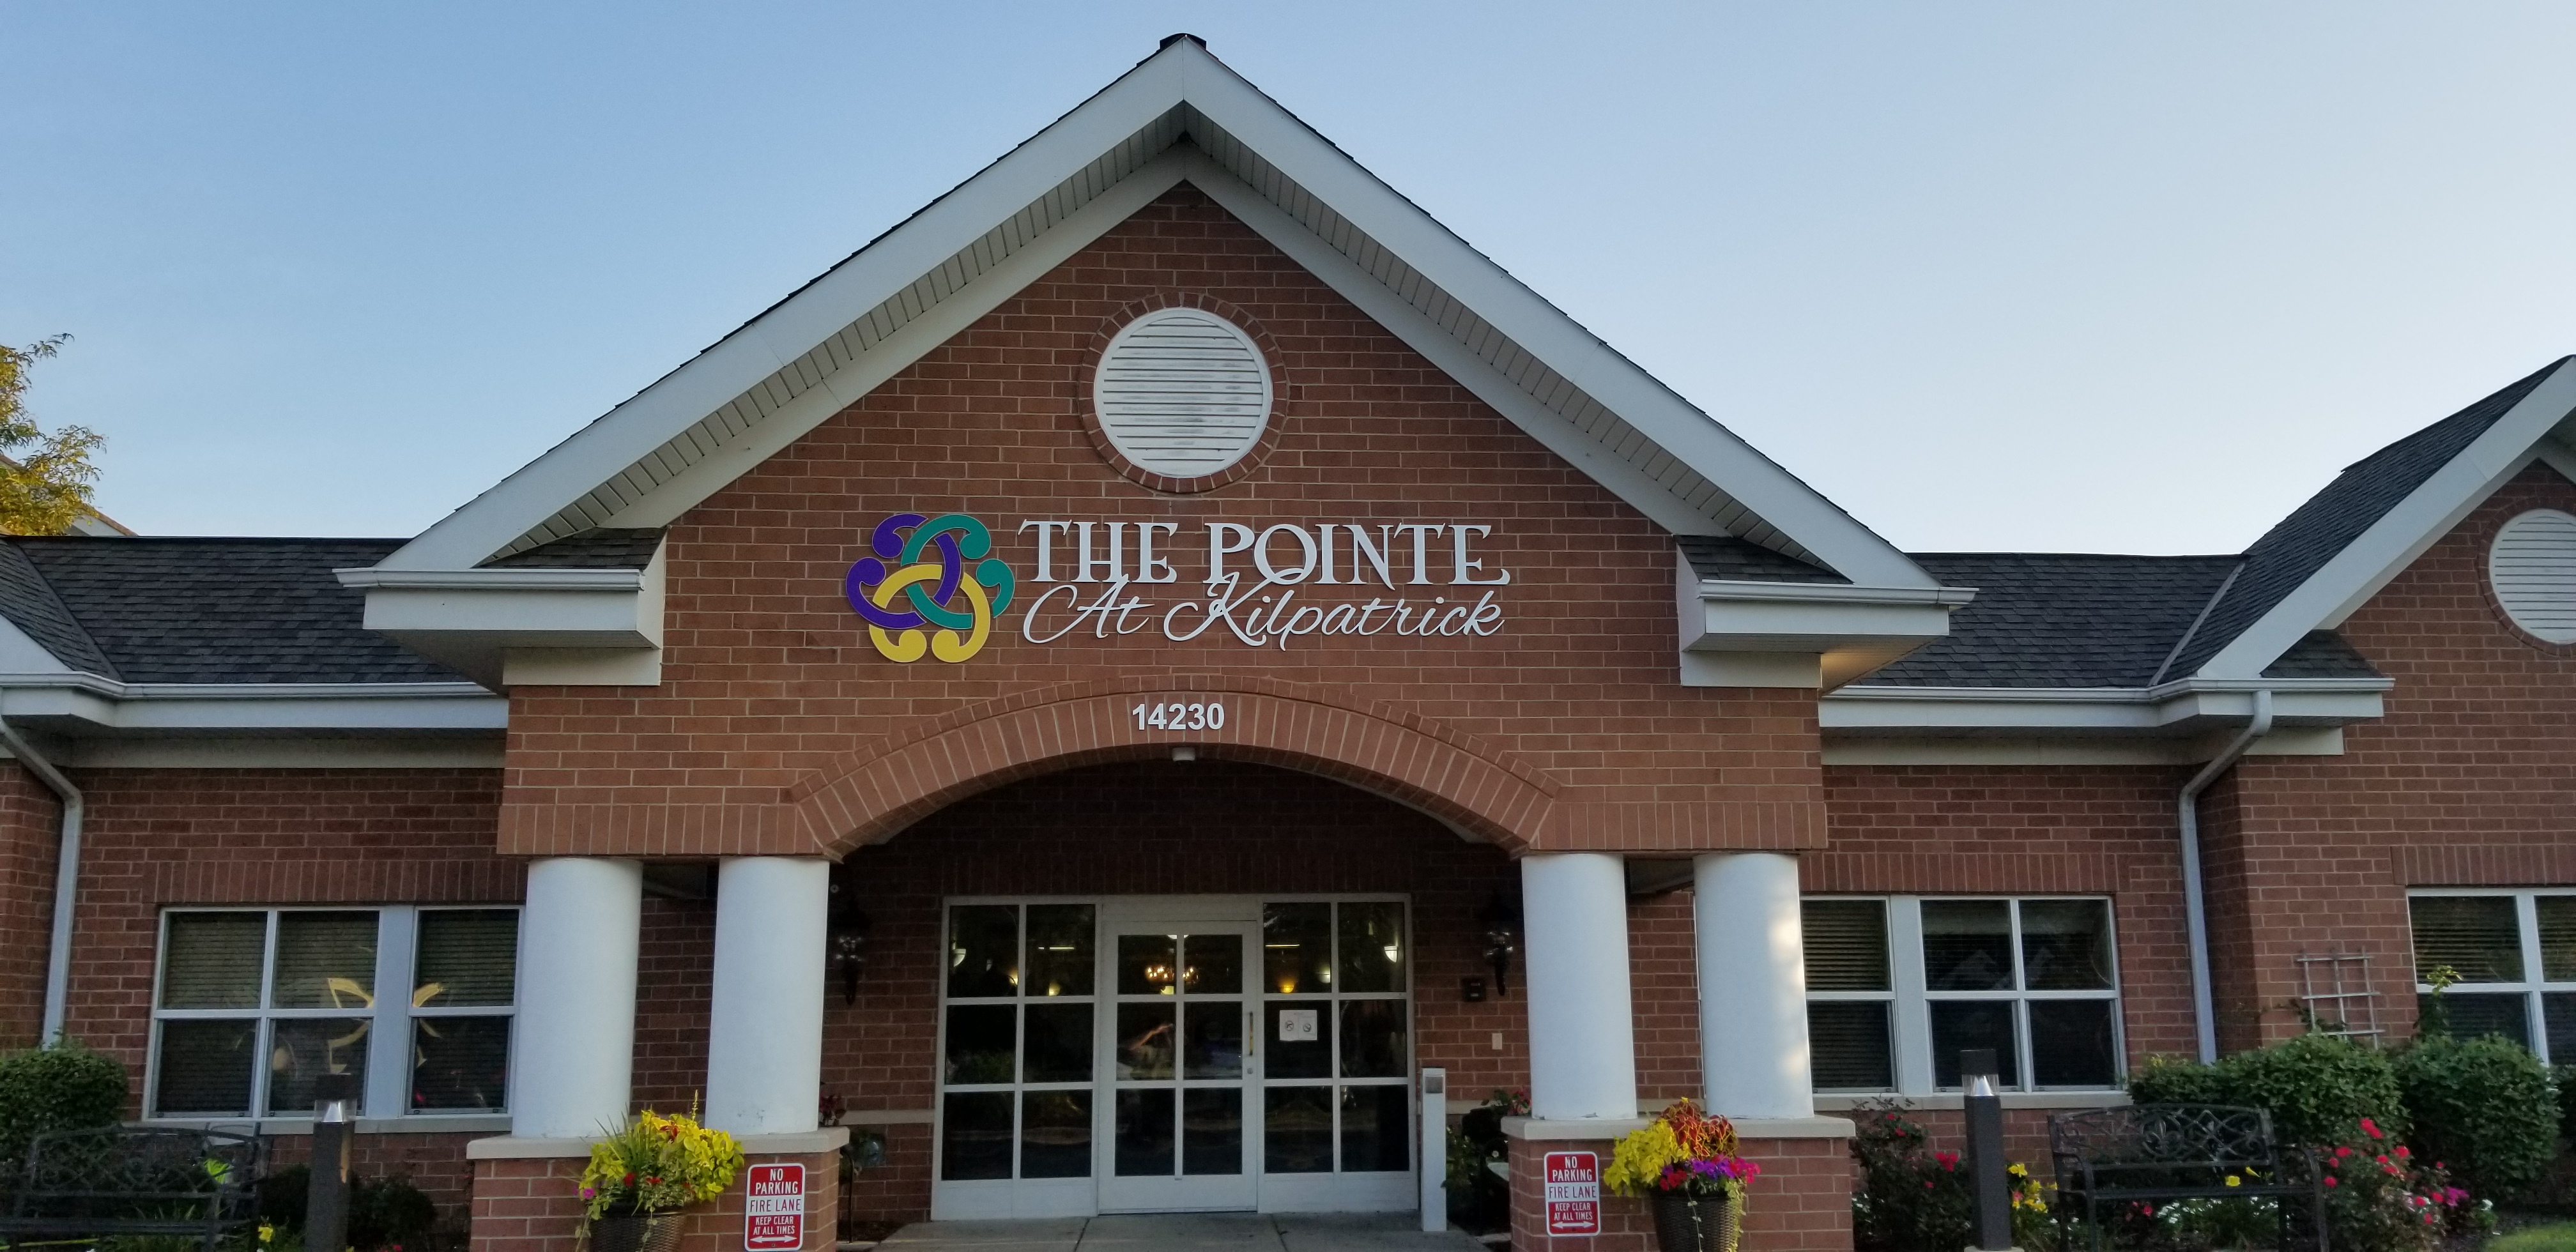 The Pointe at Kilpatrick image